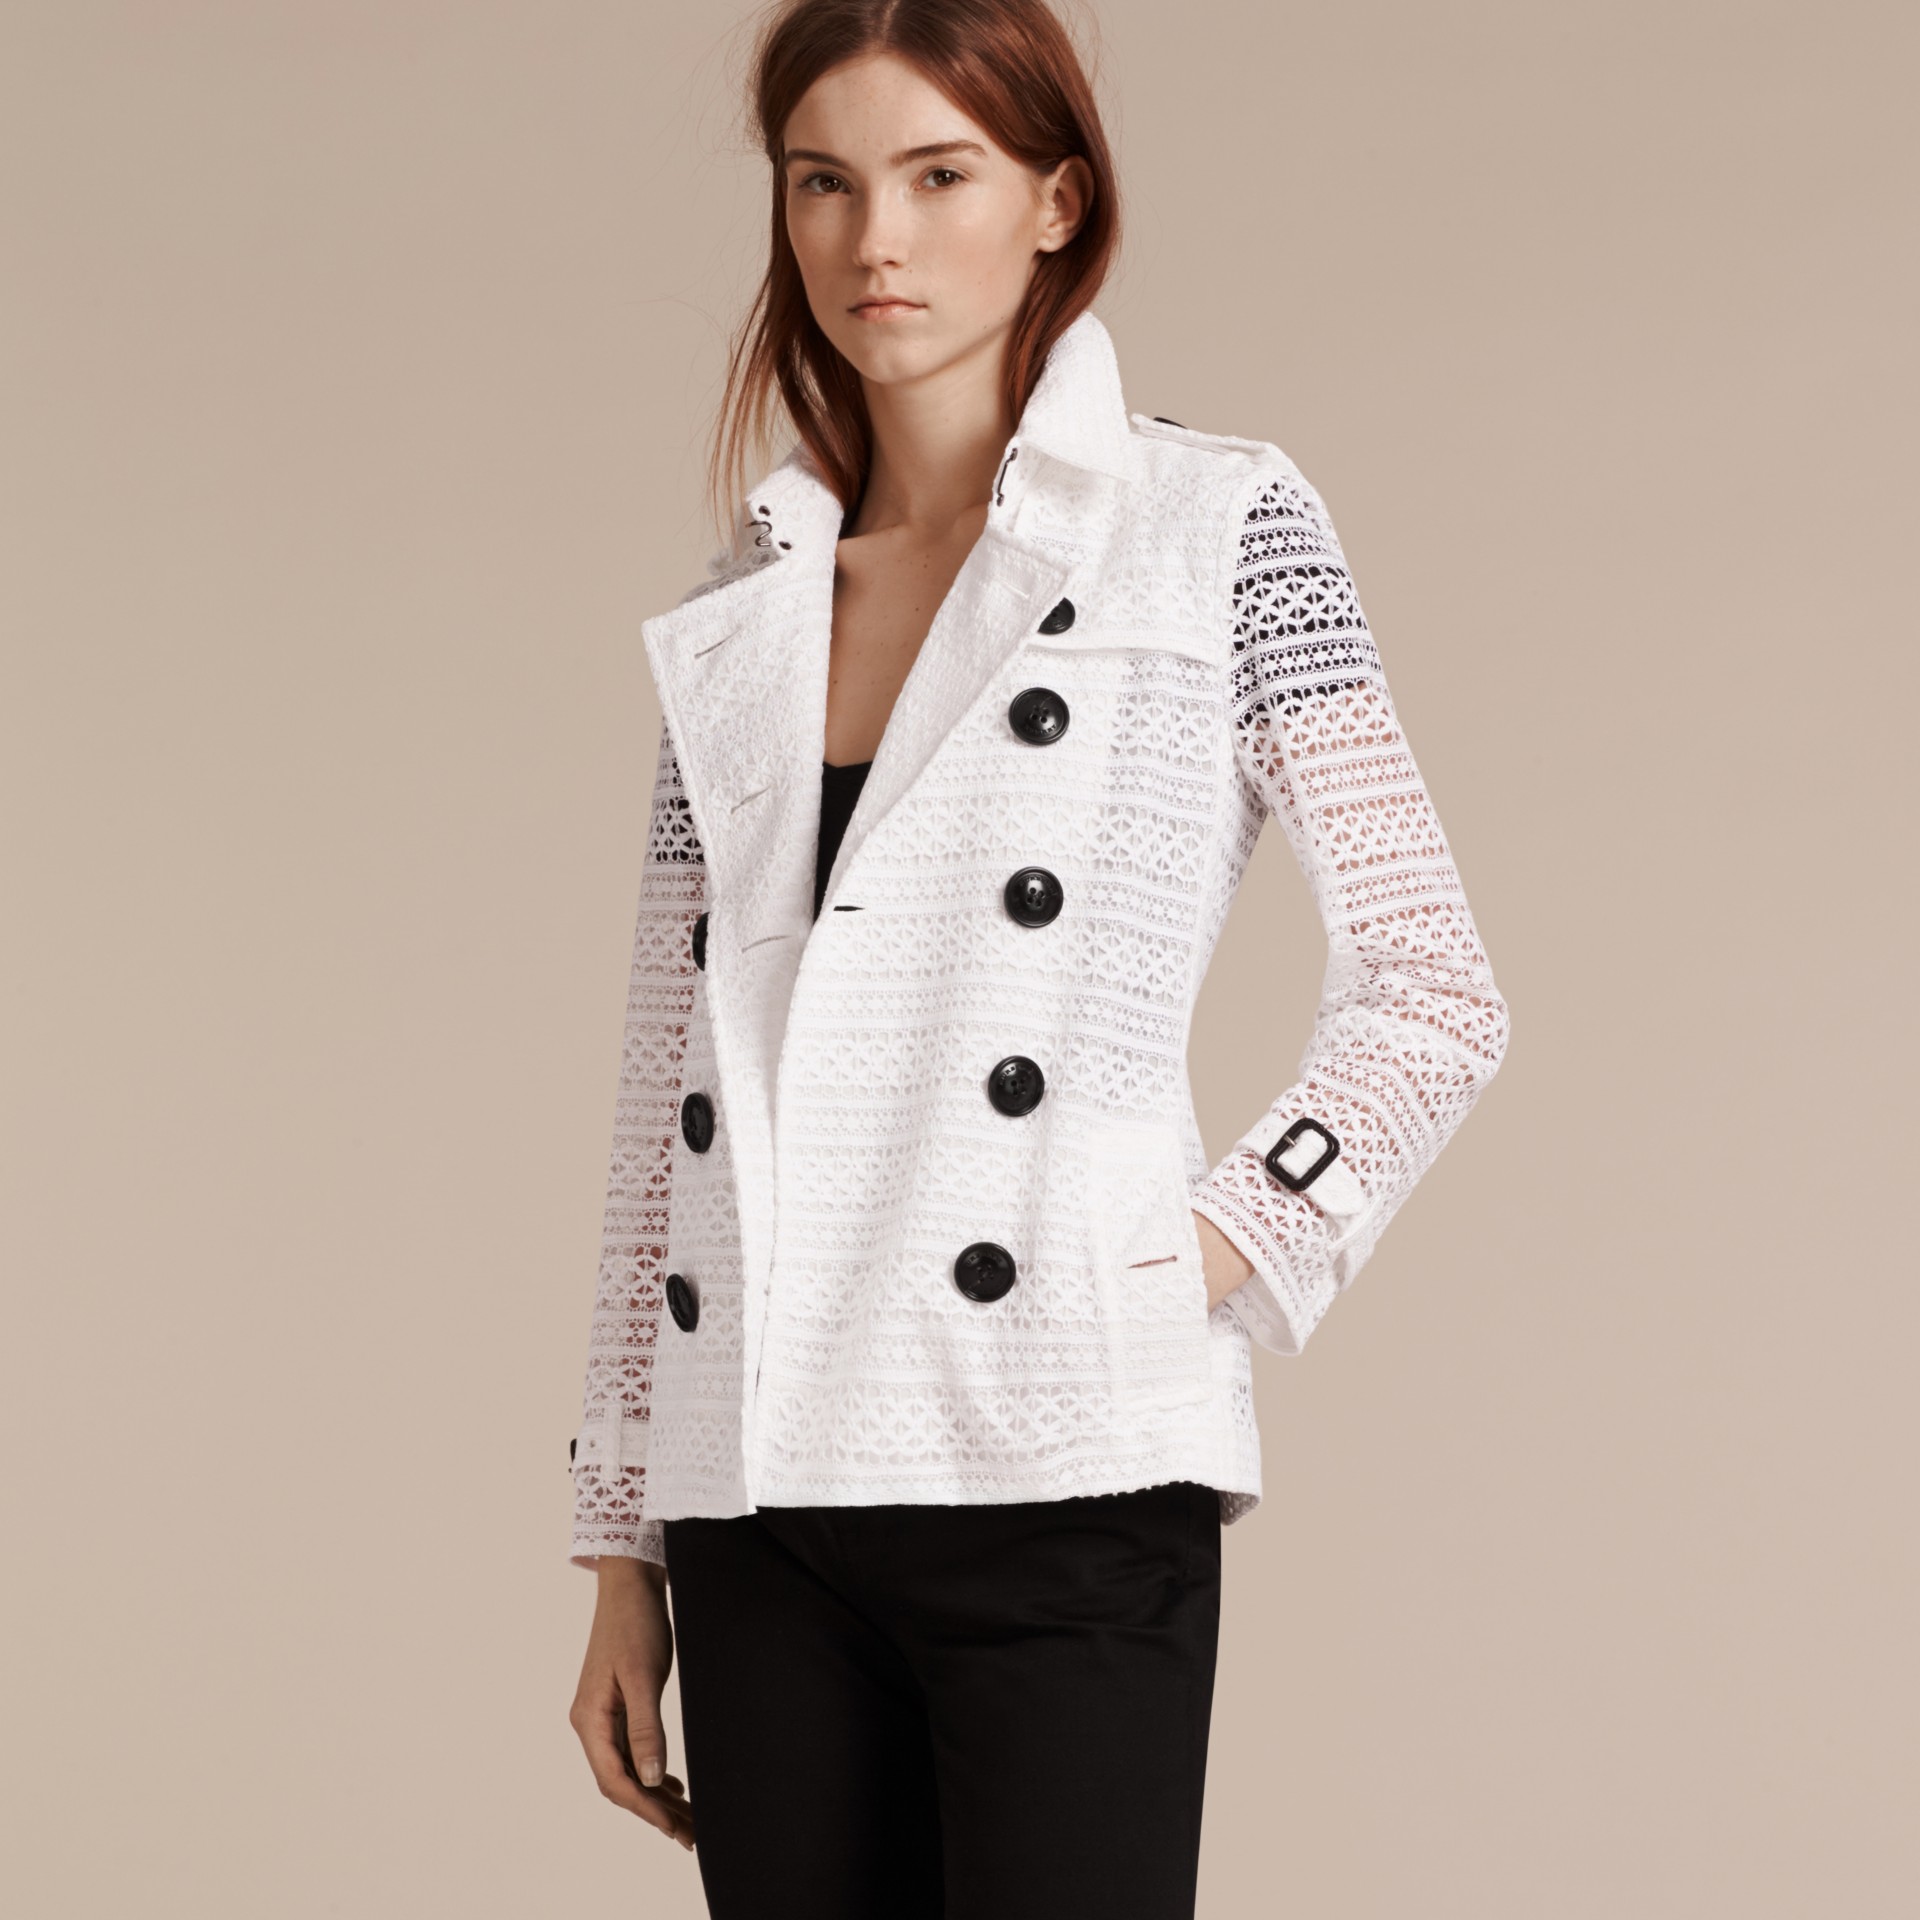 English Lace Trench Jacket in White - Women | Burberry United States